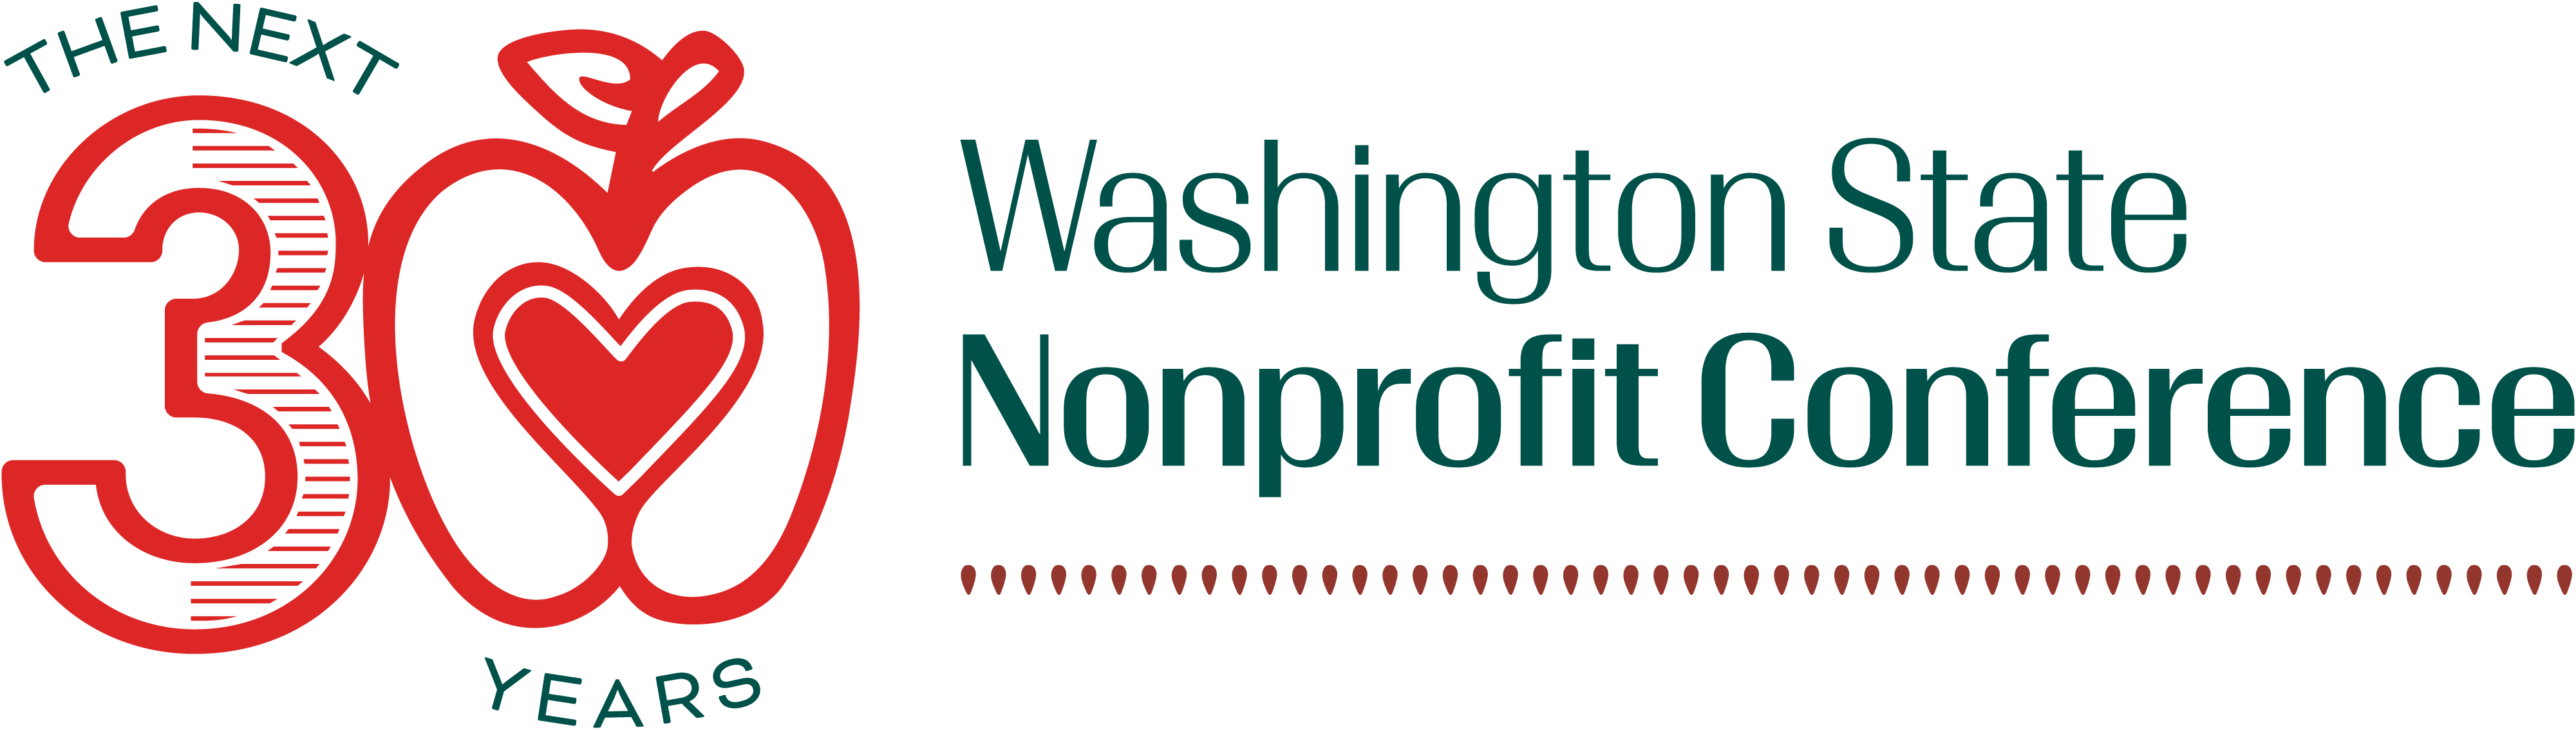 Washington State Nonprofit Conference: The Next 30 Years